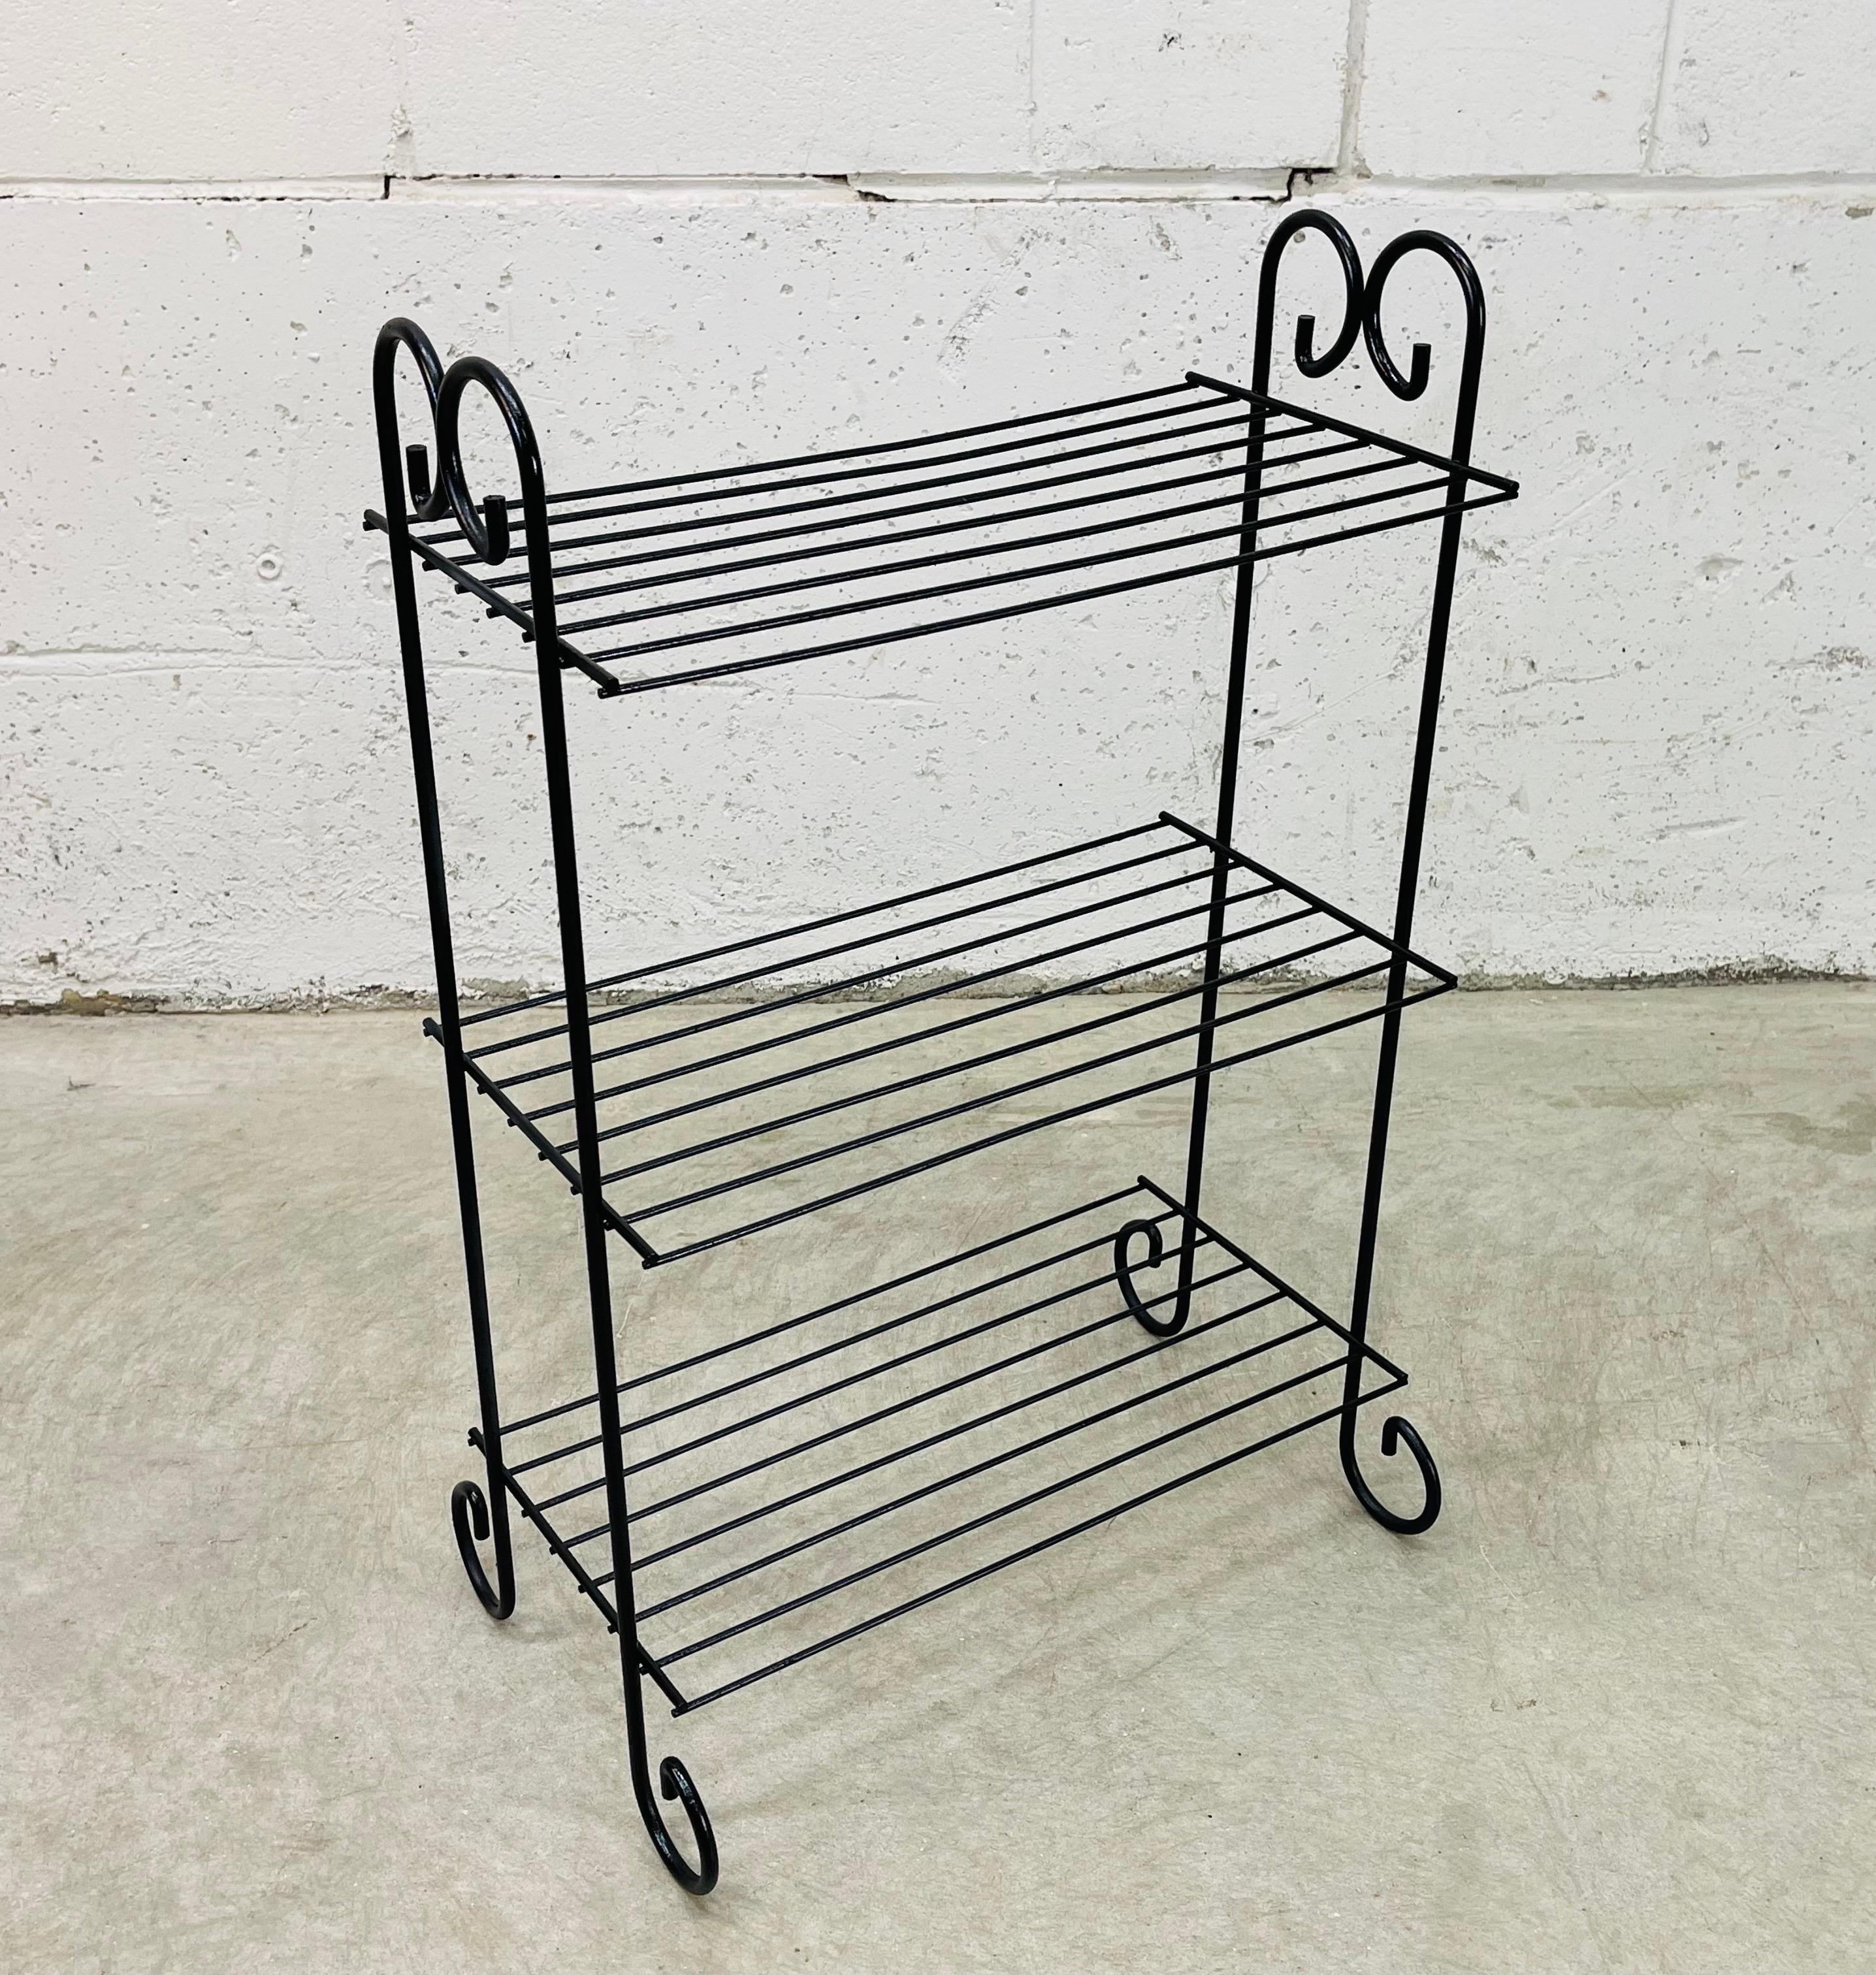 Vintage 1960s metal three tier black shelf. The shelf has turned rounded edges. The shelves are 9.5” apart. No marks.